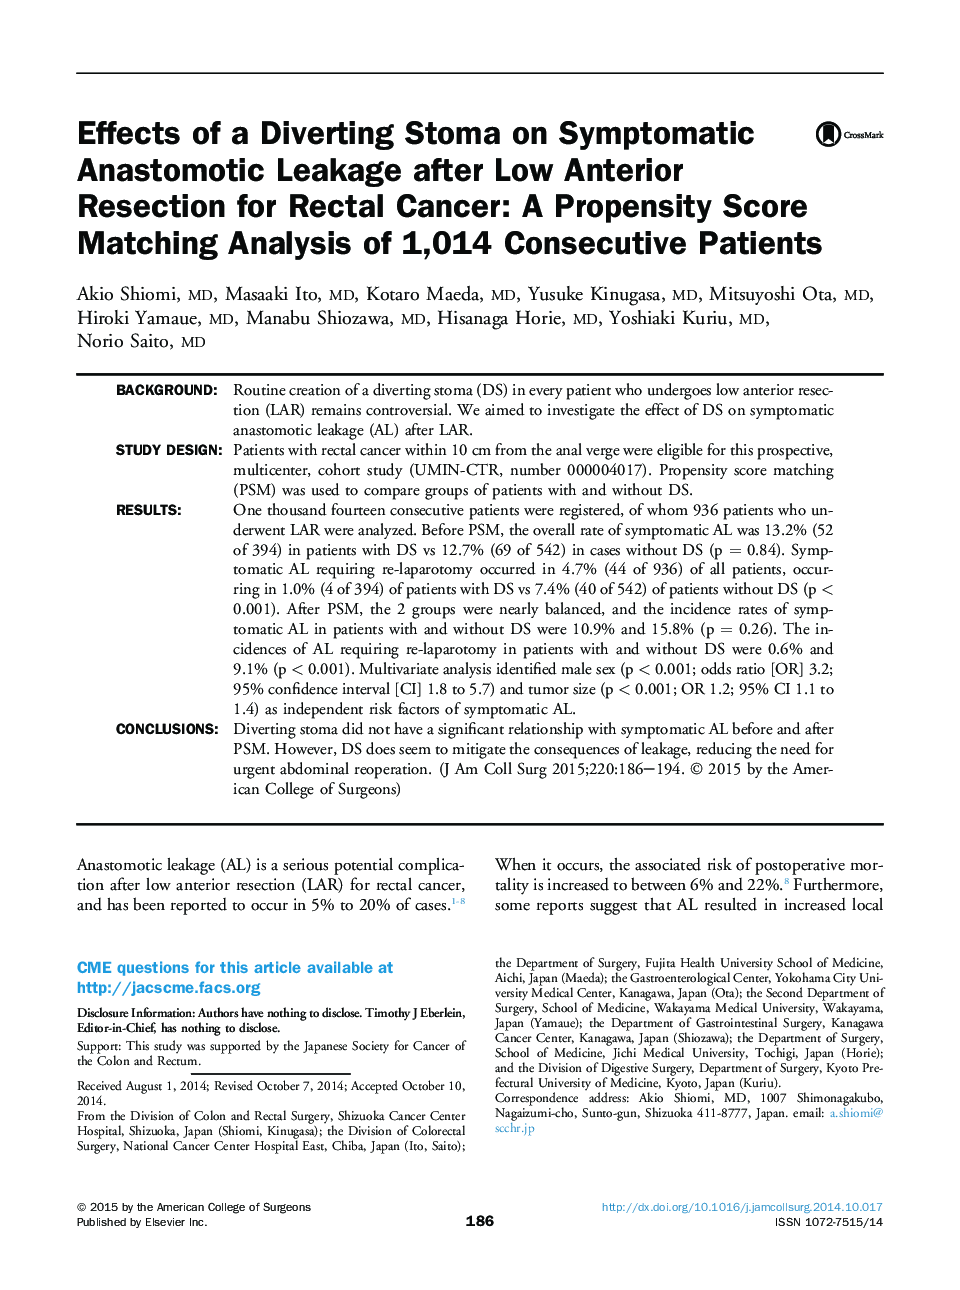 Original scientific articleEffects of a Diverting Stoma on Symptomatic Anastomotic Leakage after Low Anterior Resection for Rectal Cancer: A Propensity Score Matching Analysis of 1,014 Consecutive Patients